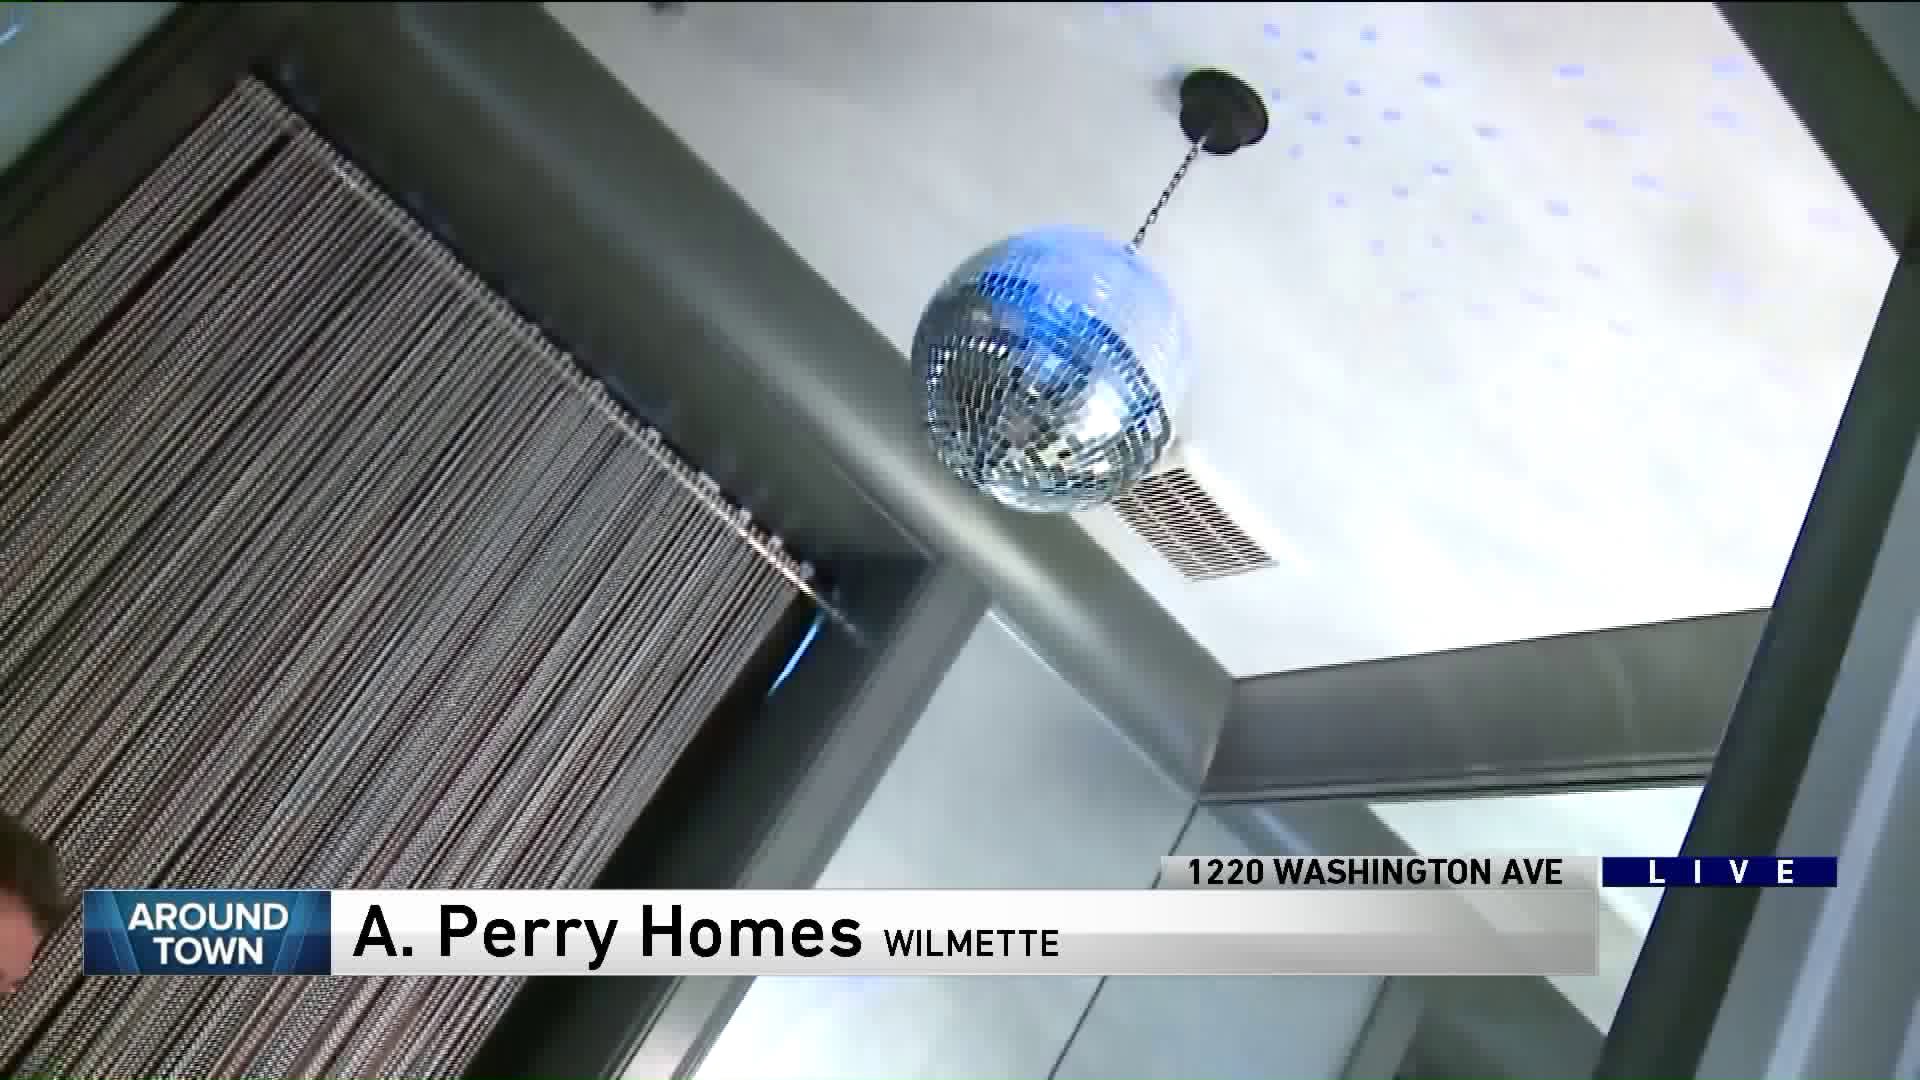 Around Town checks out A. Perry Homes studio and office